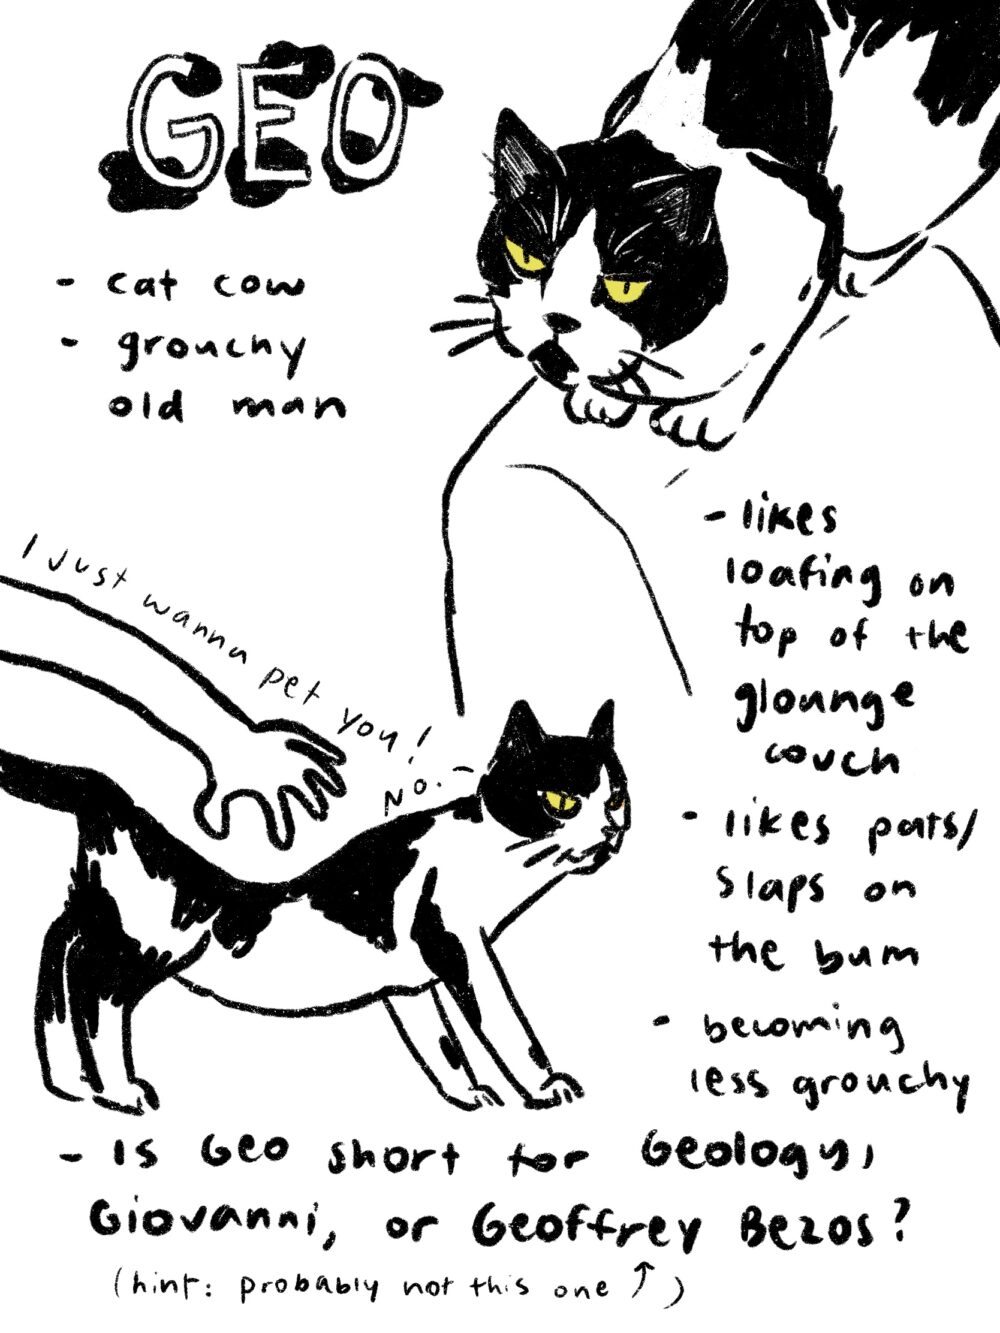 Geo. cat cow. grouchy old man. likes loafing on top of the glounge couch. likes pats/slaps on the bum. becoming less grouchy. is geo short for geology, giovanni, or geoffrey bezos. probably not the last one